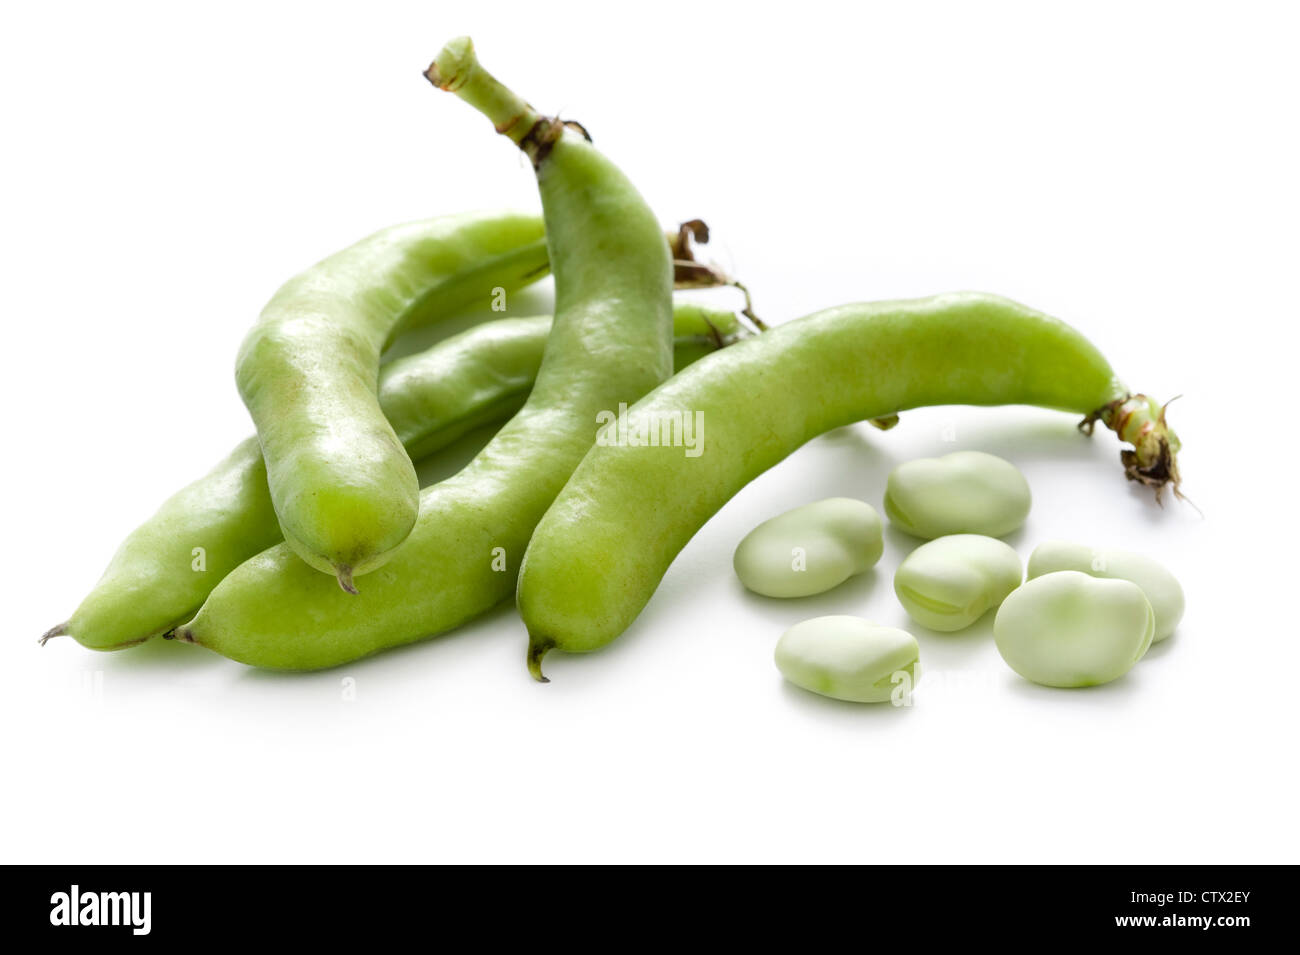 fava beans or broad beans shelled and in pods isolated on a white background Stock Photo